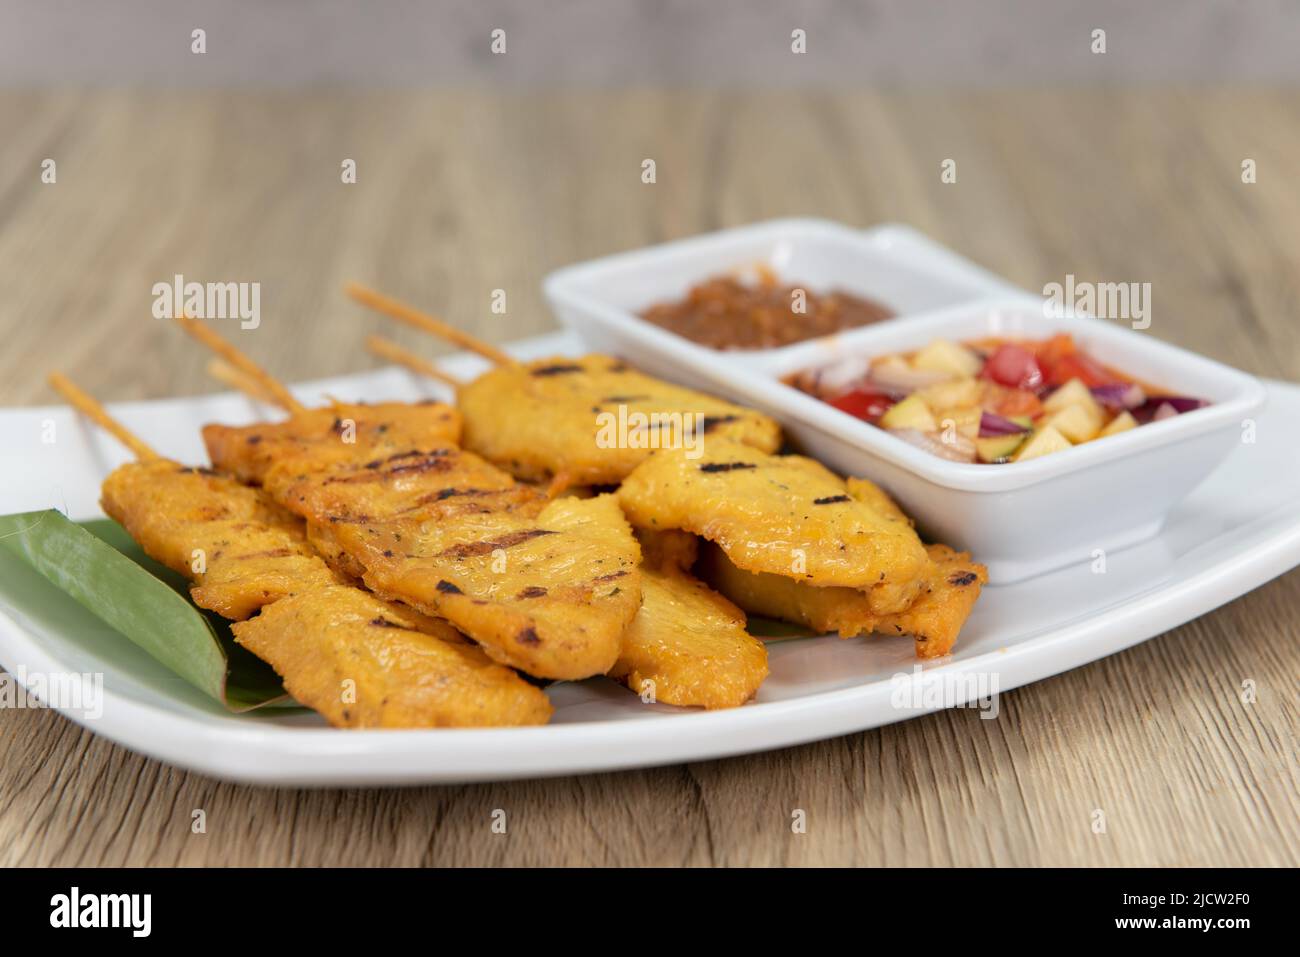 Tangy satay chicken on sticks, served with salsa, dipping sauce and ready to eat. Stock Photo